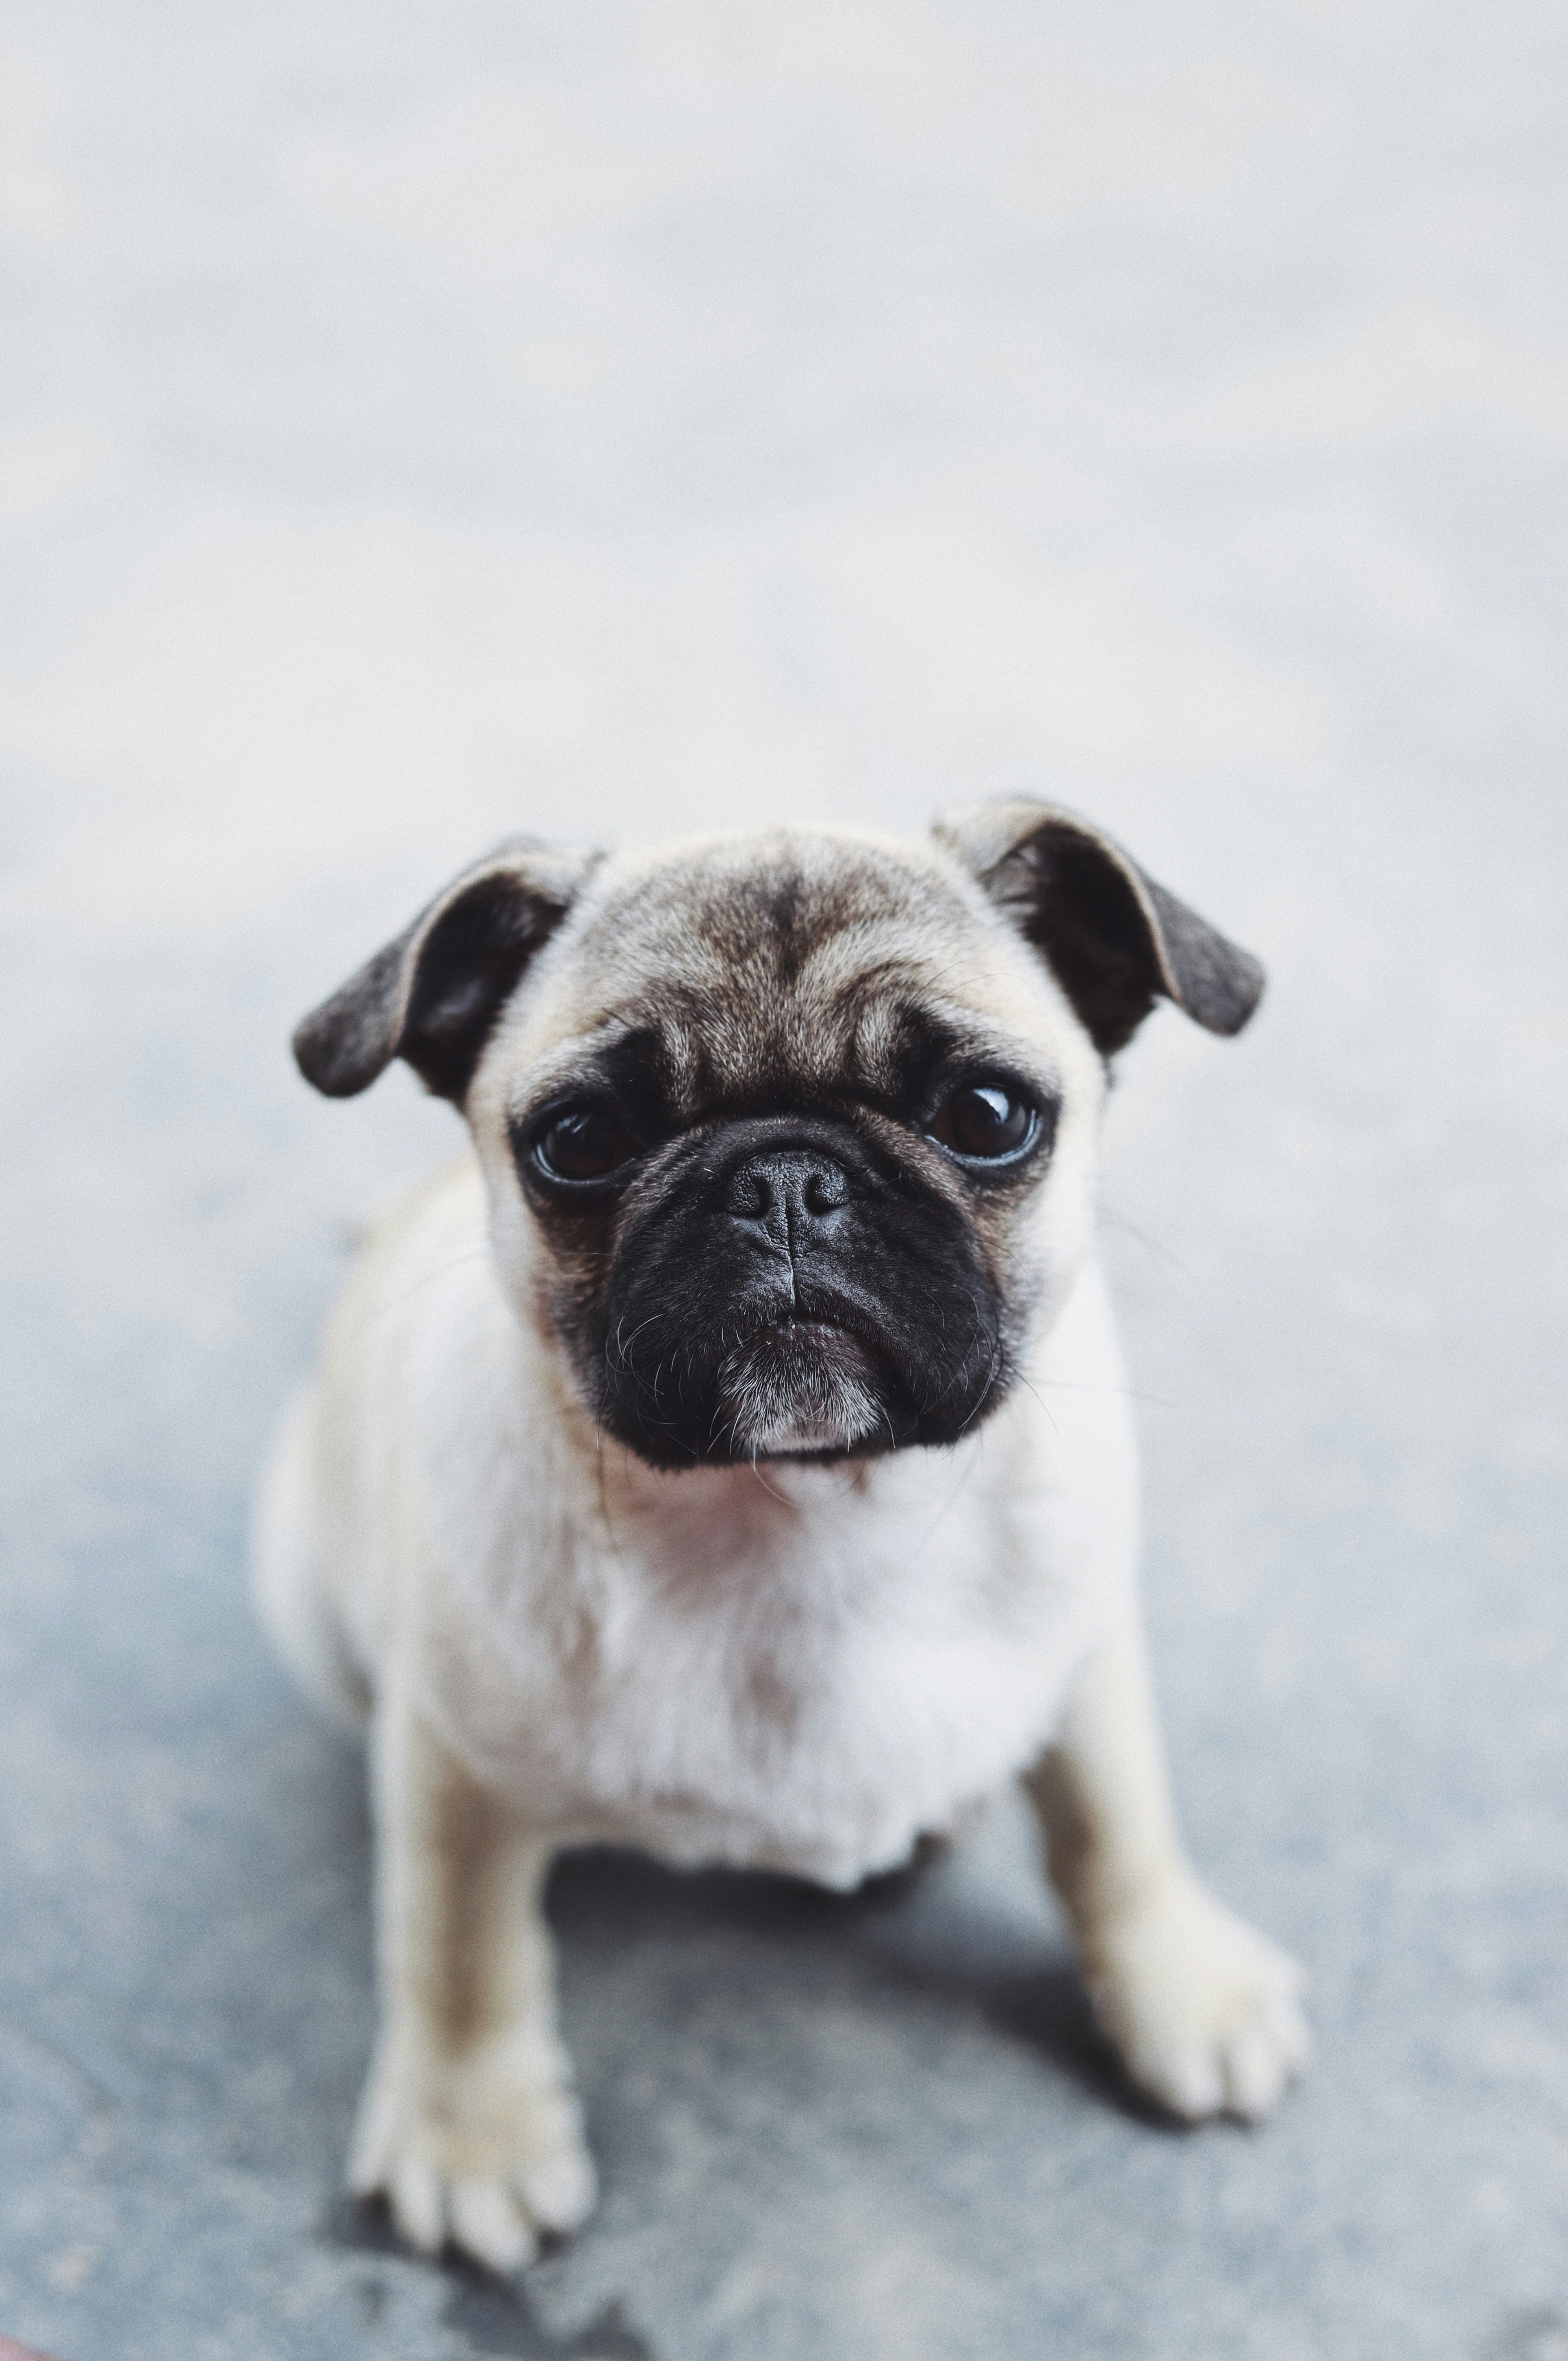 Pug Wallpapers: Free HD Download [500+